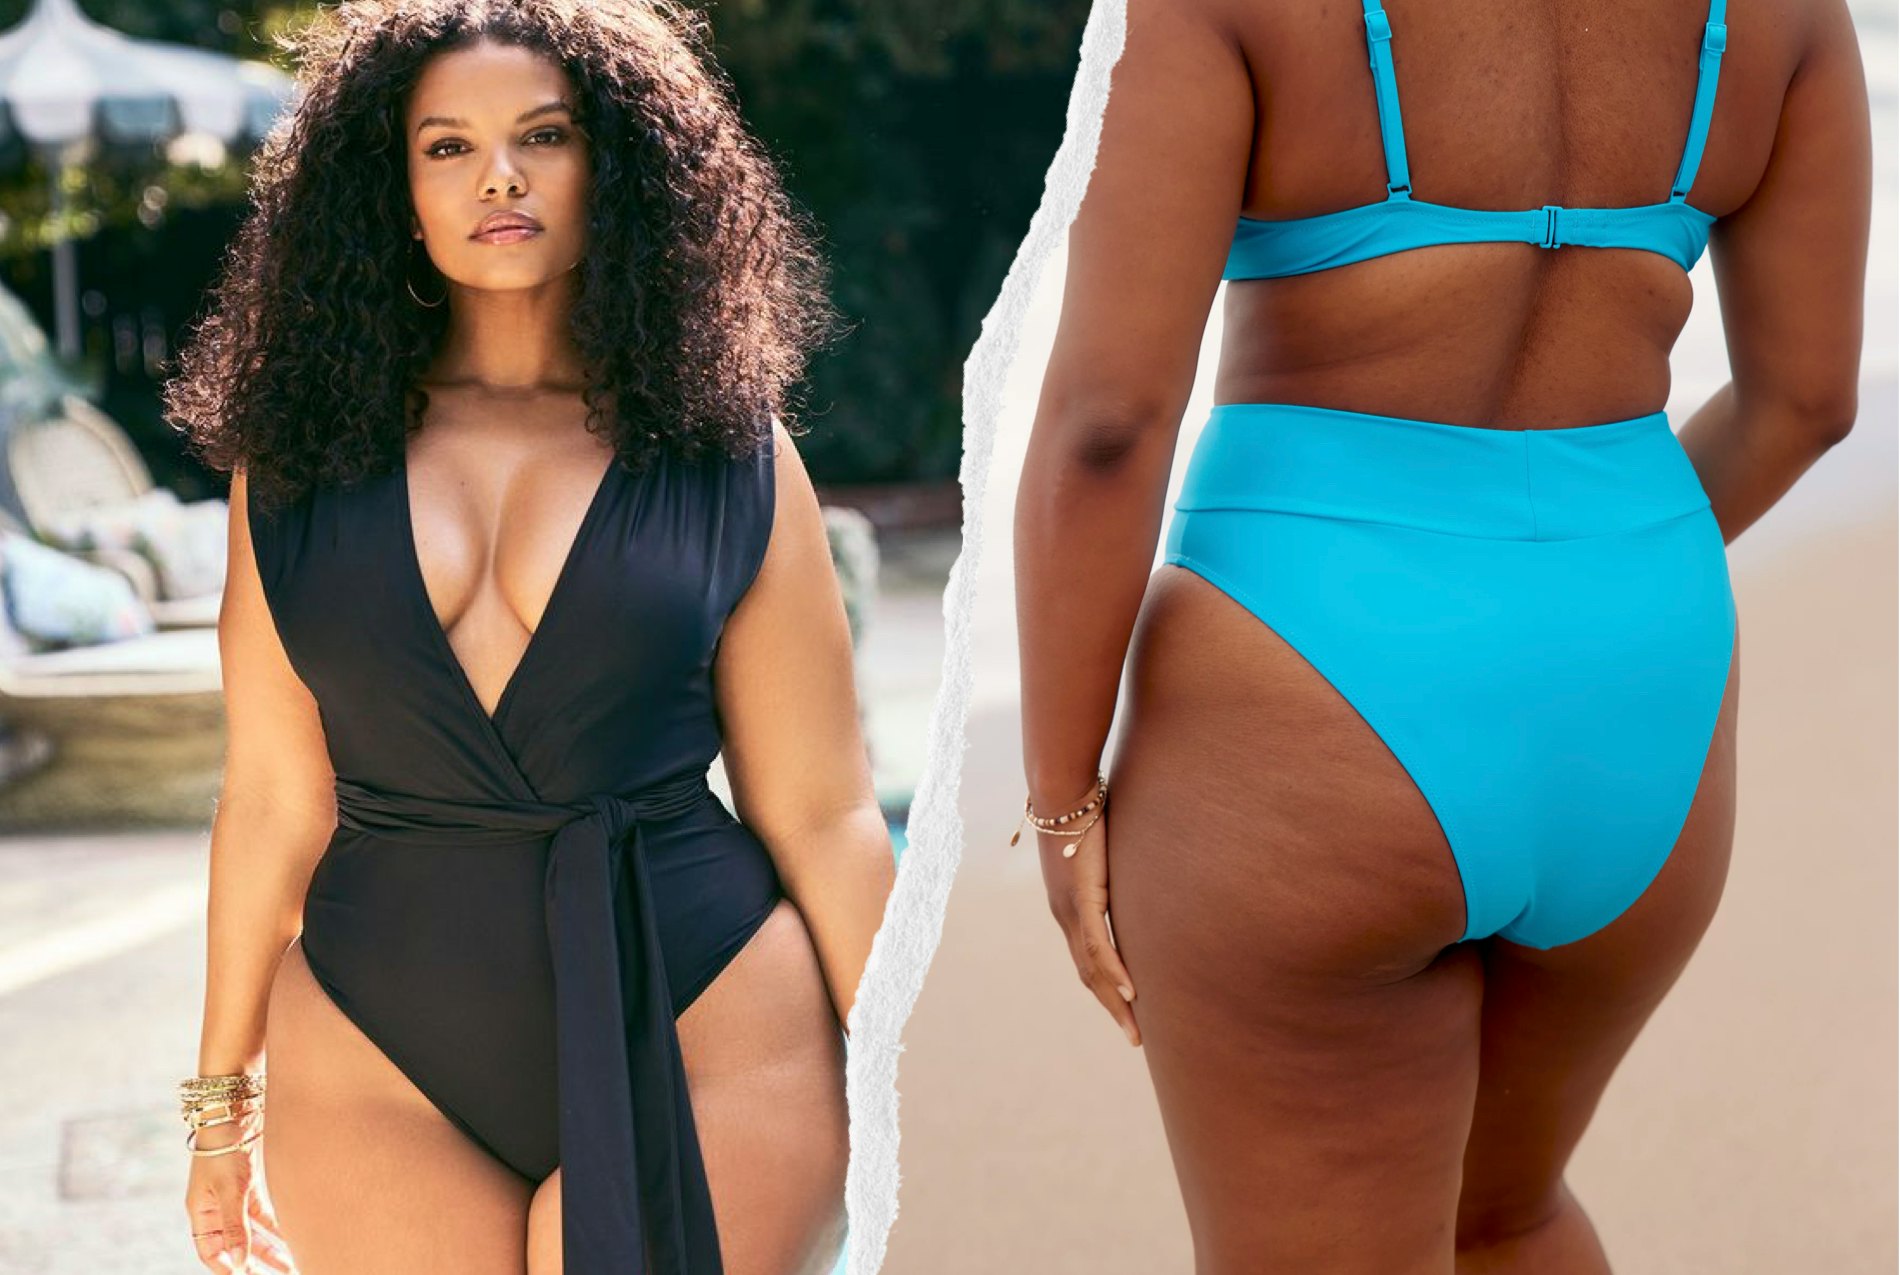 Why do so many women's swimsuits show the entire butt? Wouldn't it